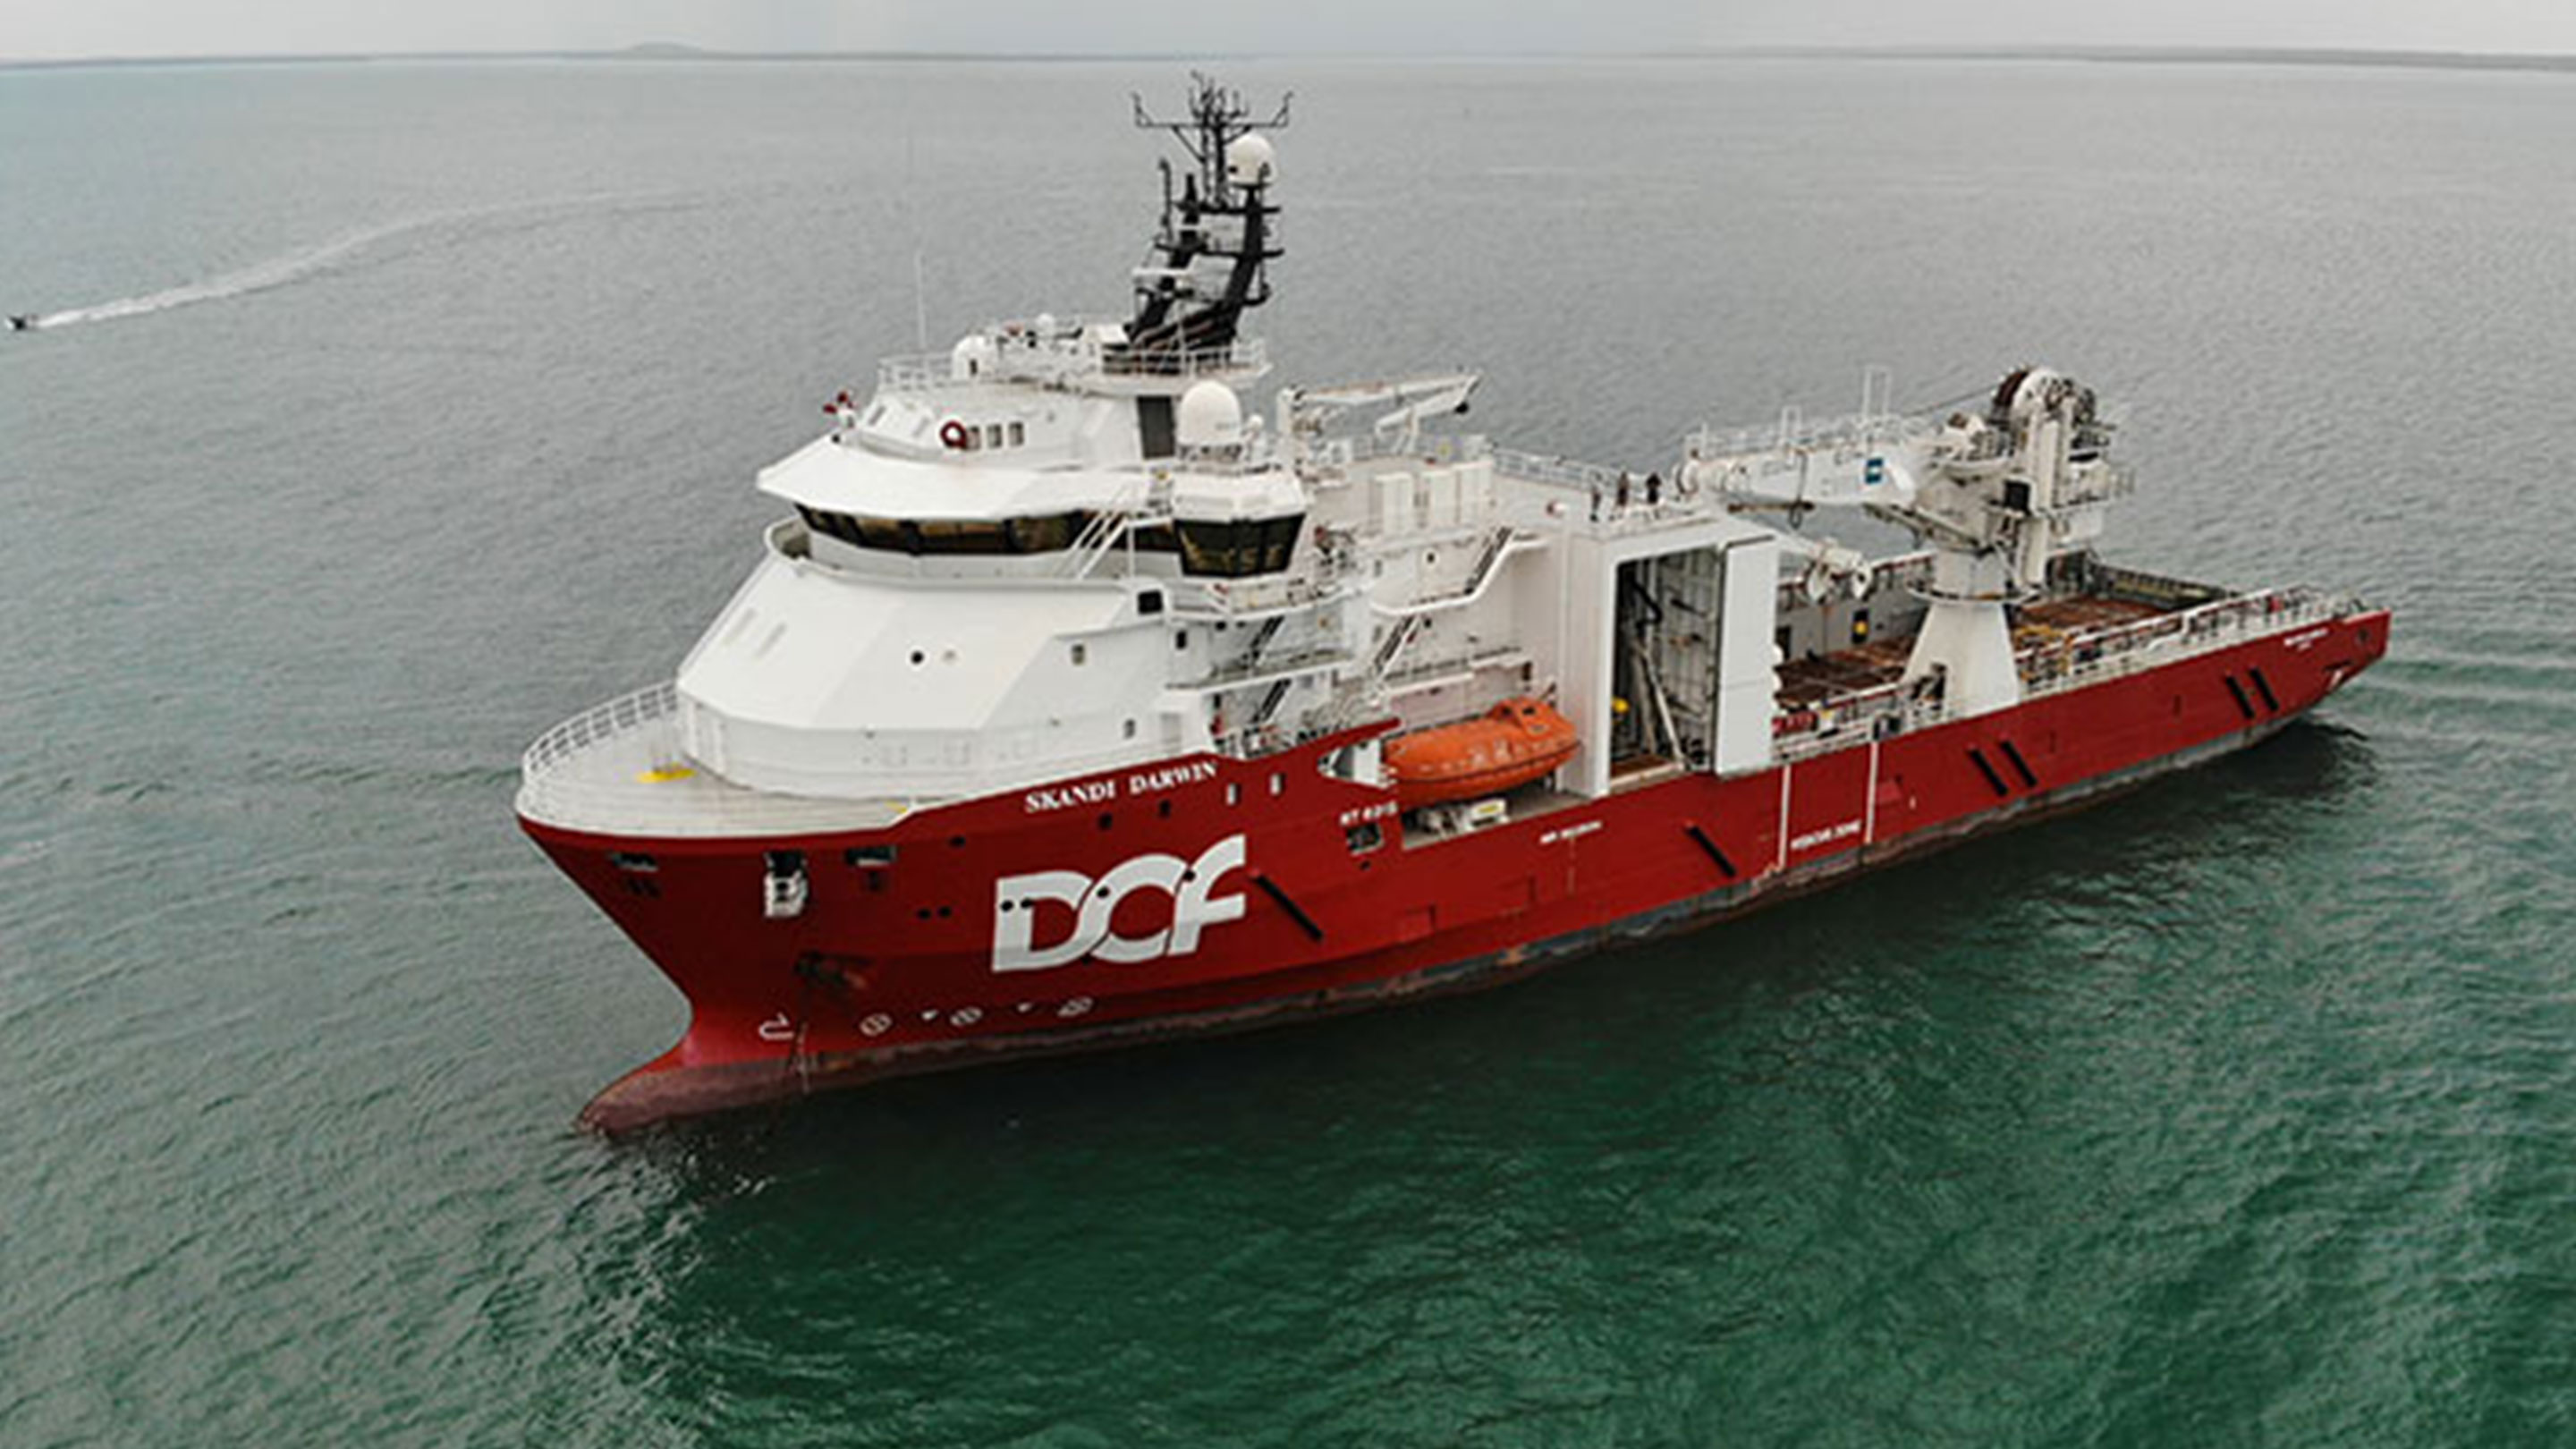 Esso Australia charters Multi-Purpose Supply Vessel to support decommissioning activities in Bass Strait